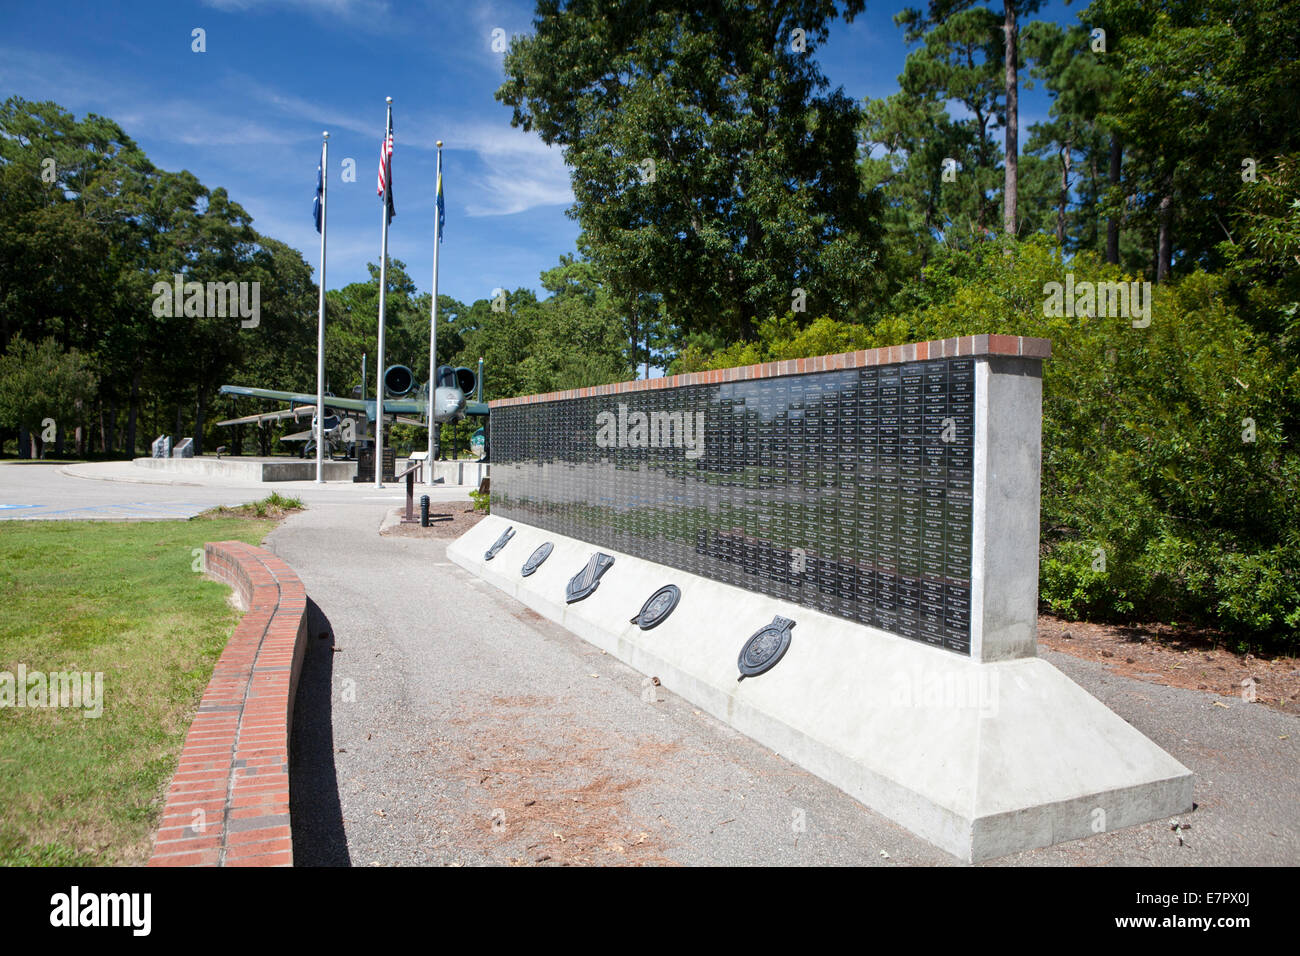 Wall of Service at Warbird Park, Myrtle Beach, honoring those who served at Myrtle Beach Air Force Base. Stock Photo